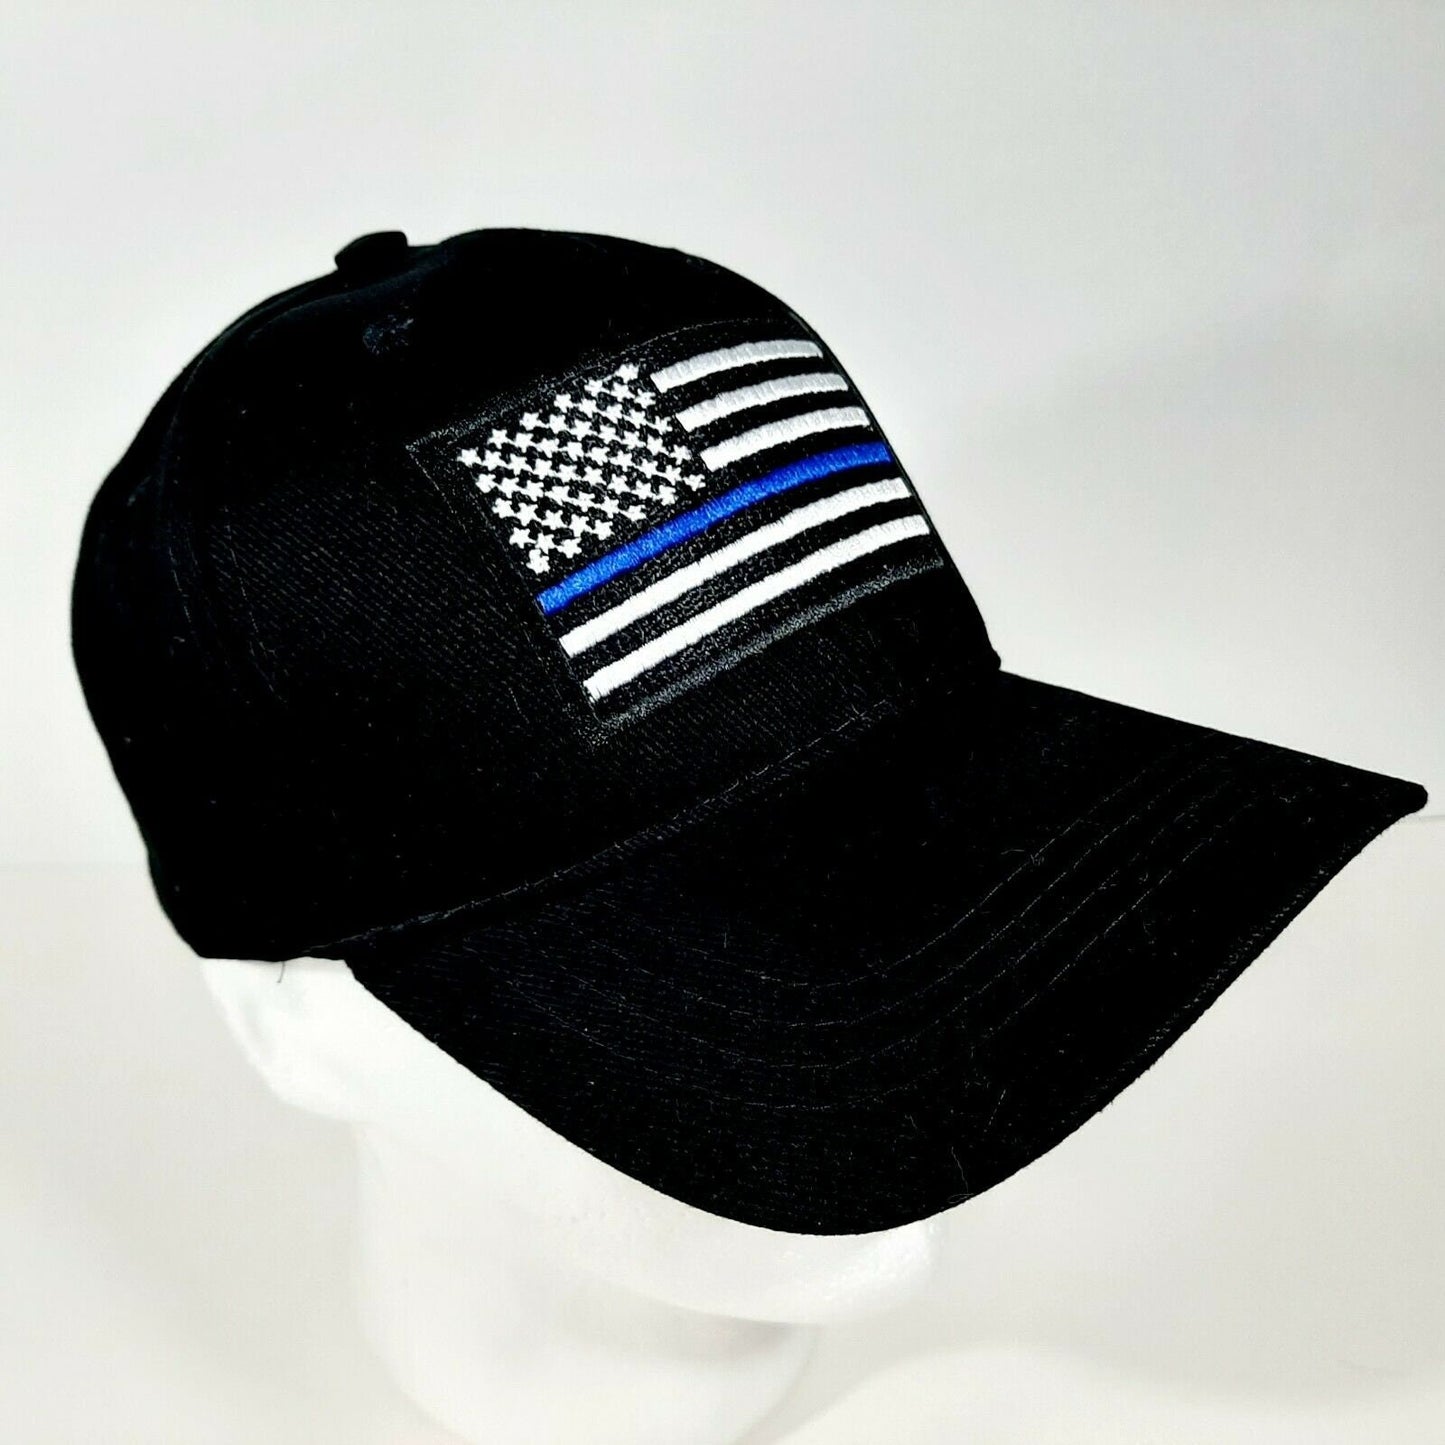 Thin Blue Line Baseball Hat Cap Black Cotton Embroidered Adjustable Strap Law